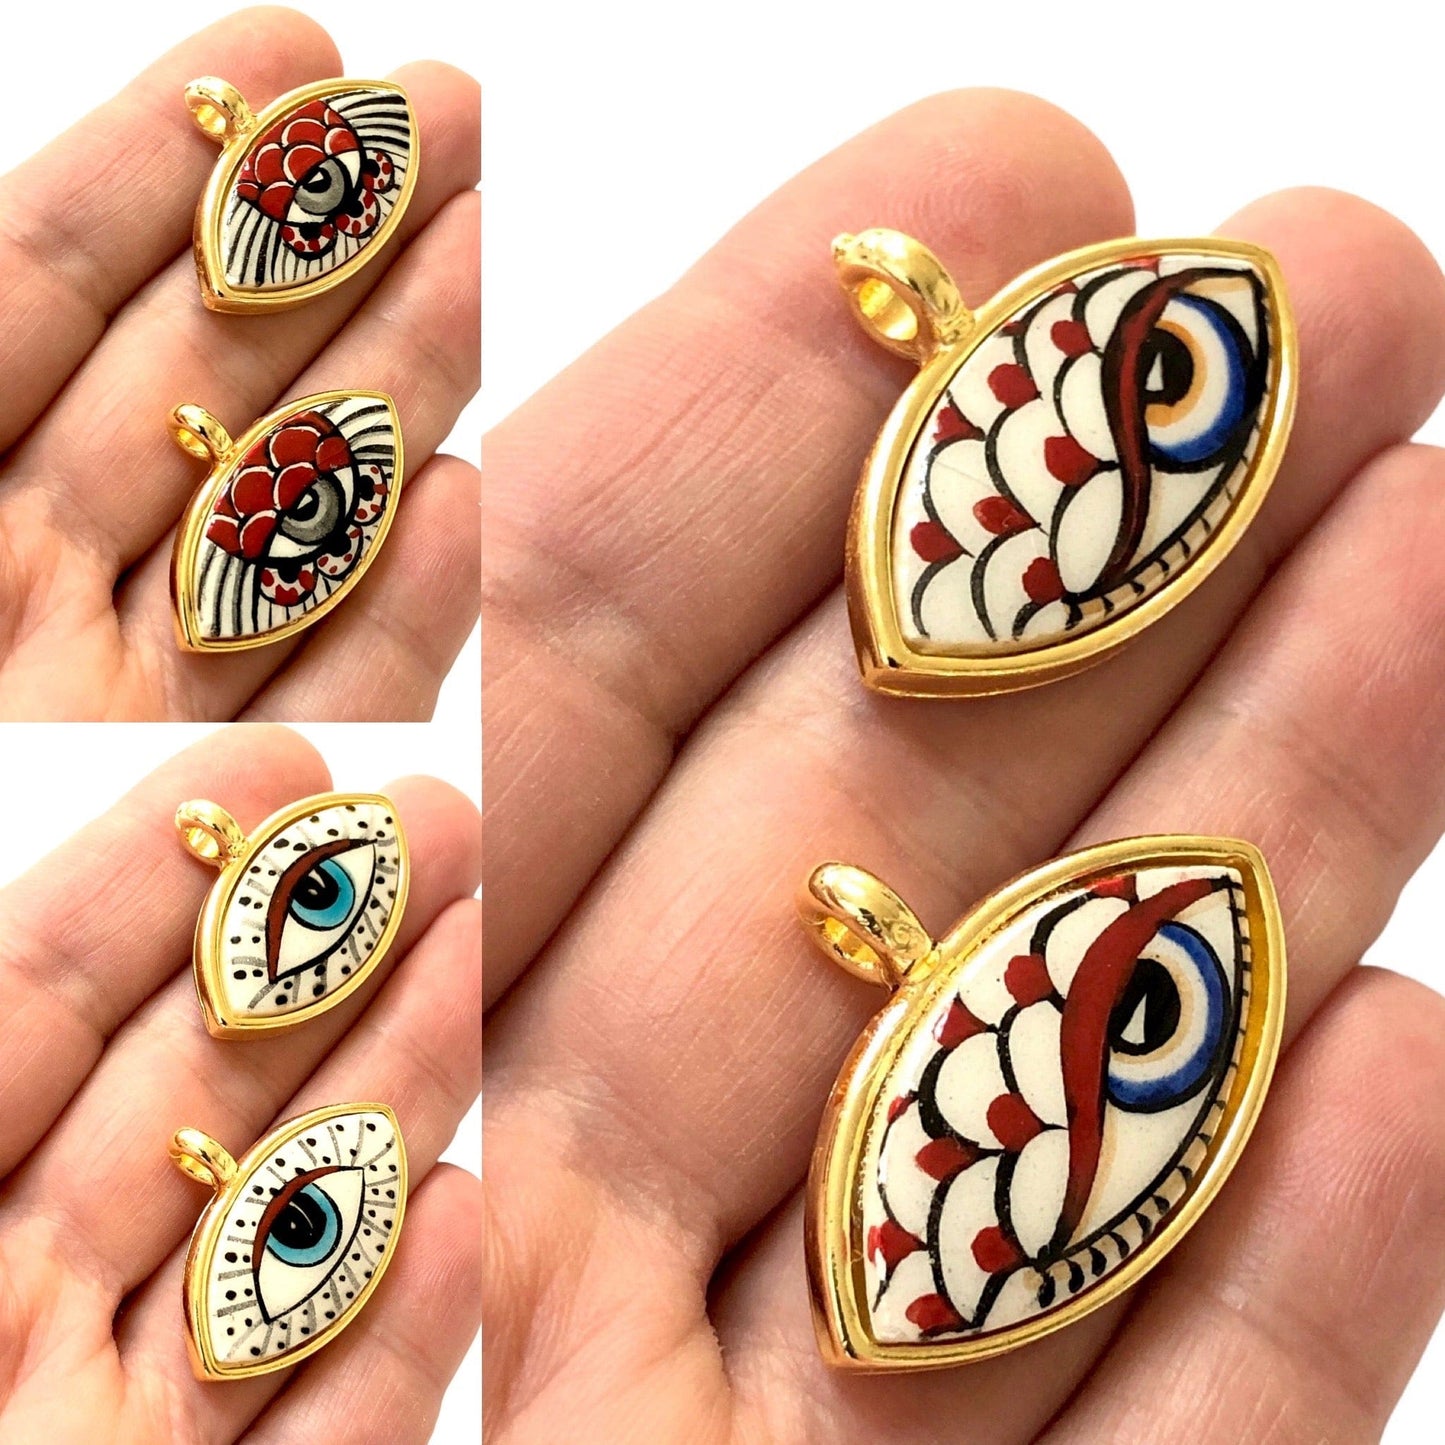 Large Gold Plated Framed Hand Painted Ceramic Eye Pendant-005